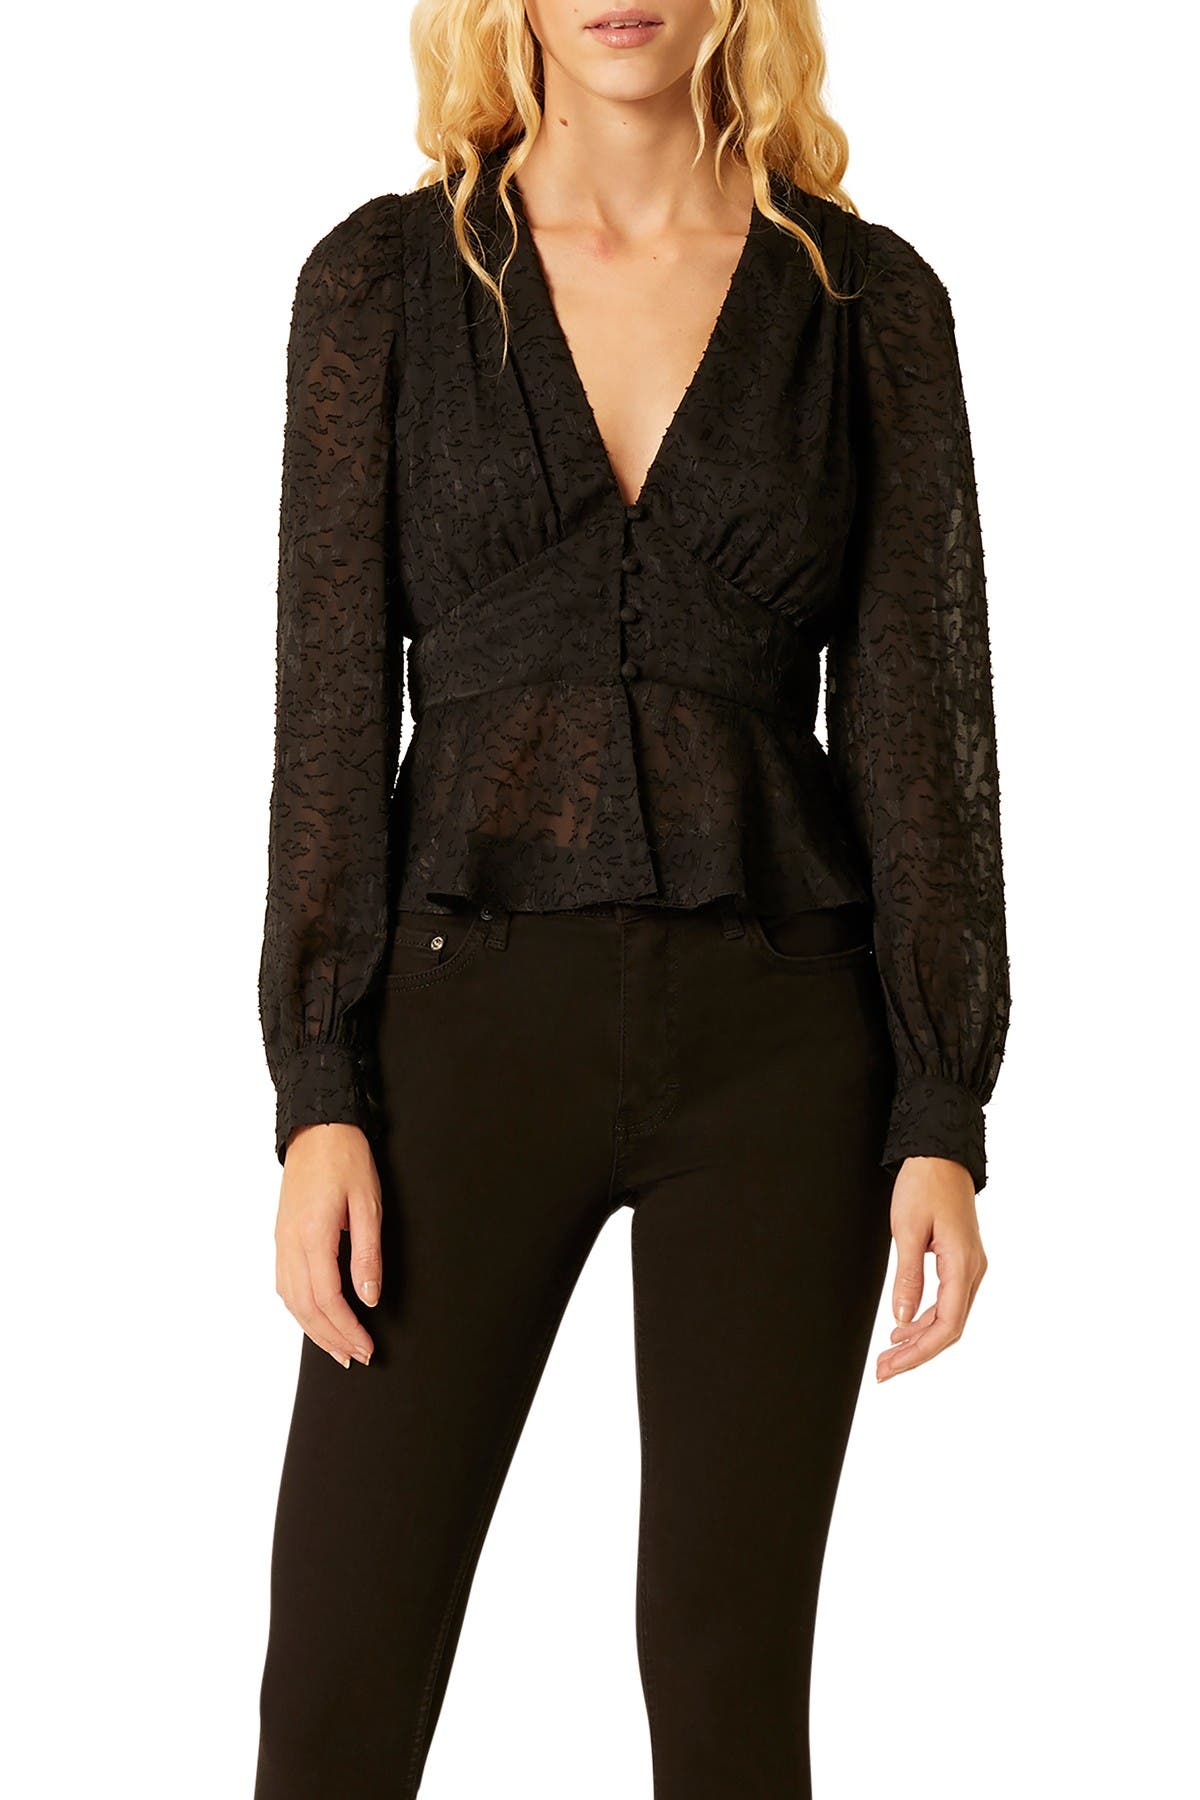 French Connection | Brenna Long Sleeve Lace Peplum Top | Nordstrom Rack